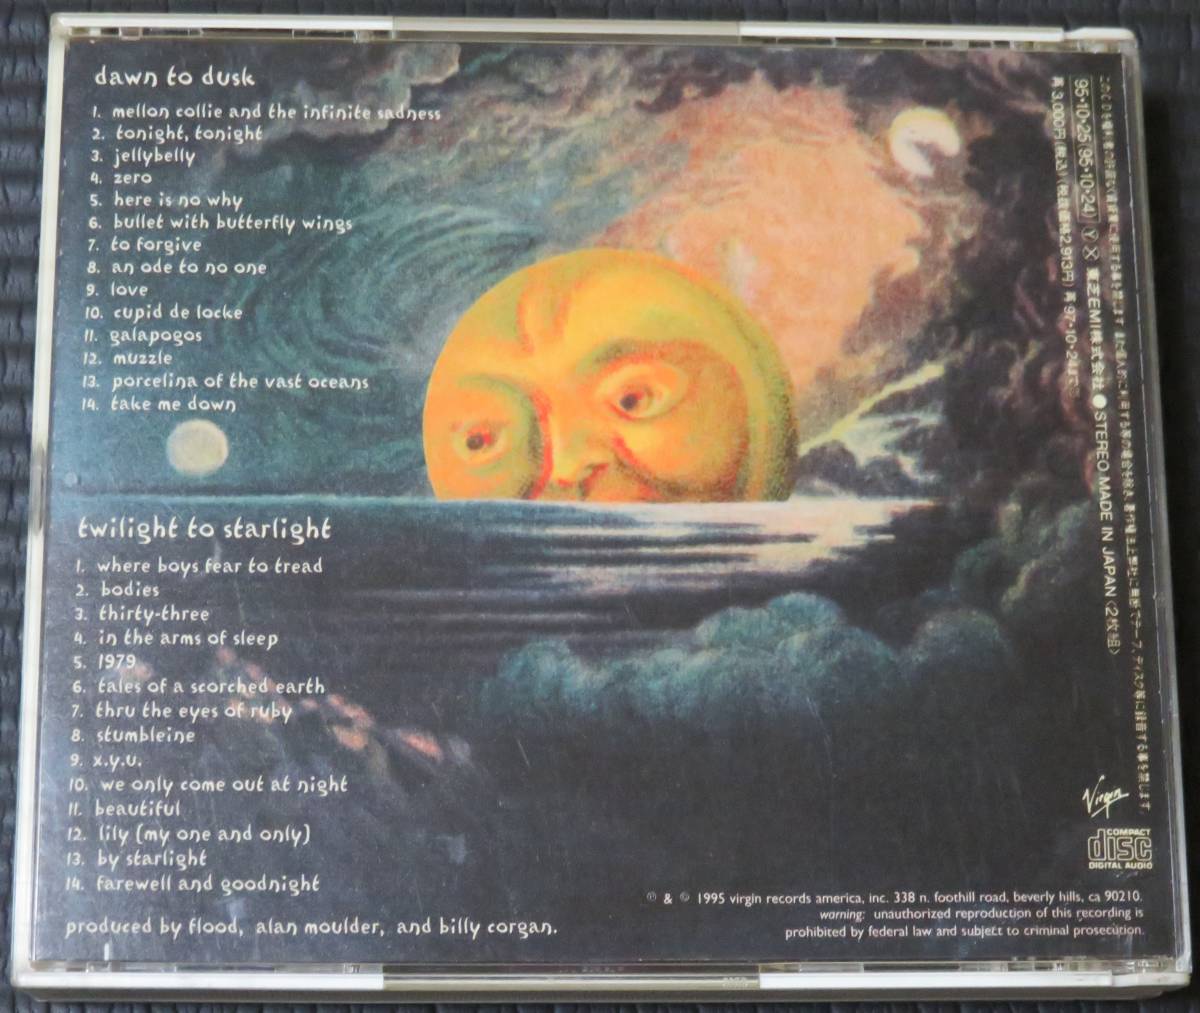 *The Smashing Pumpkins*smasing* pumpkin z melon collie and ... not . some stains 2 sheets set 2CD domestic record #2 sheets and more buy free shipping 